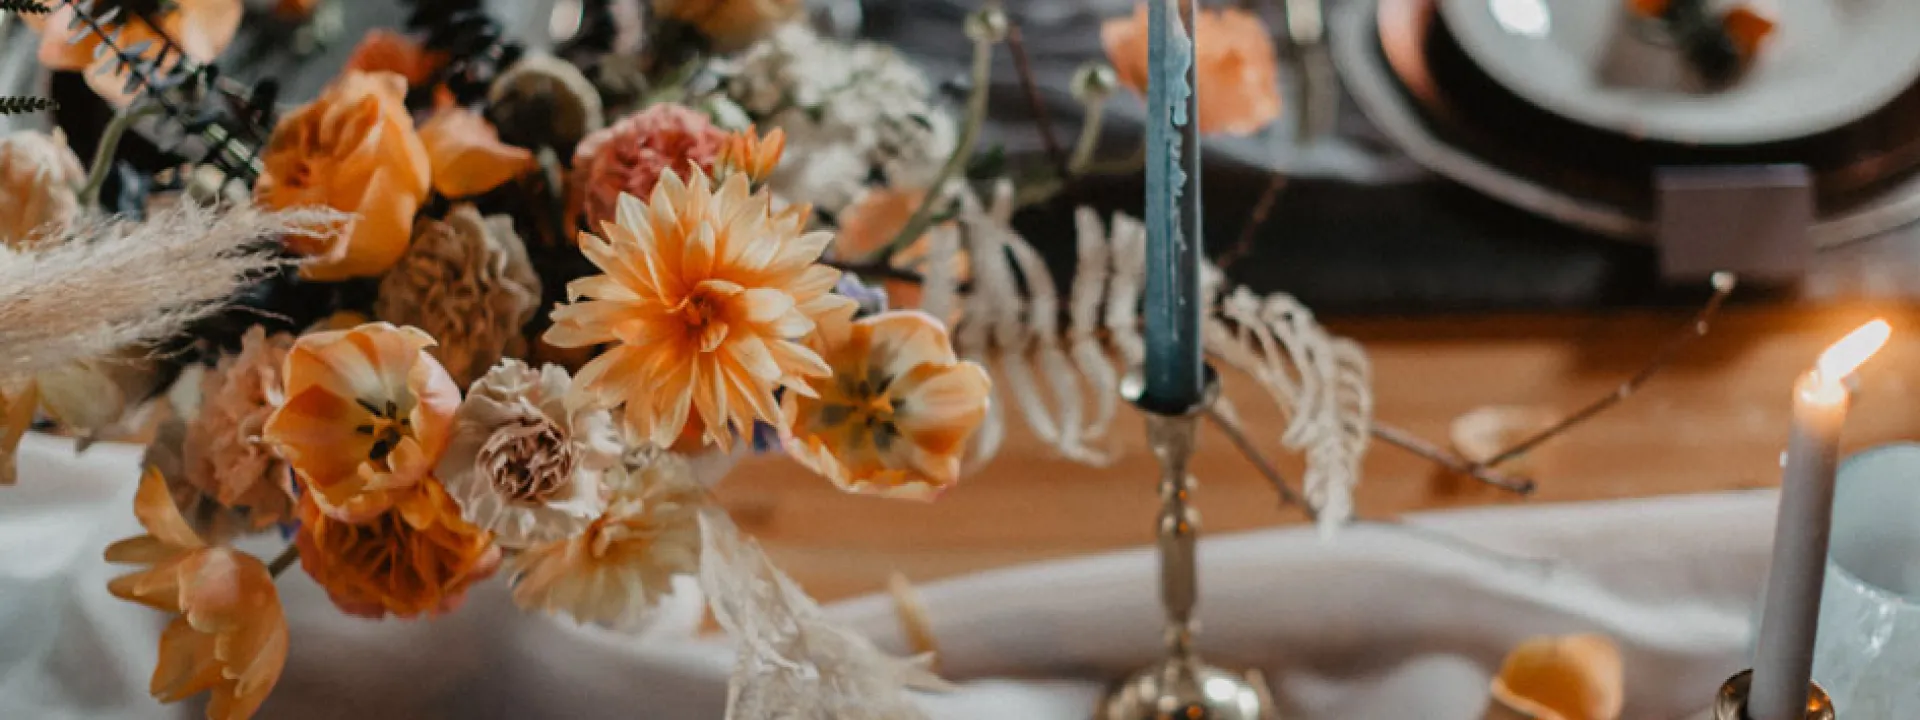 Orange blooms bedeck a table with blue tapers and flowing linen